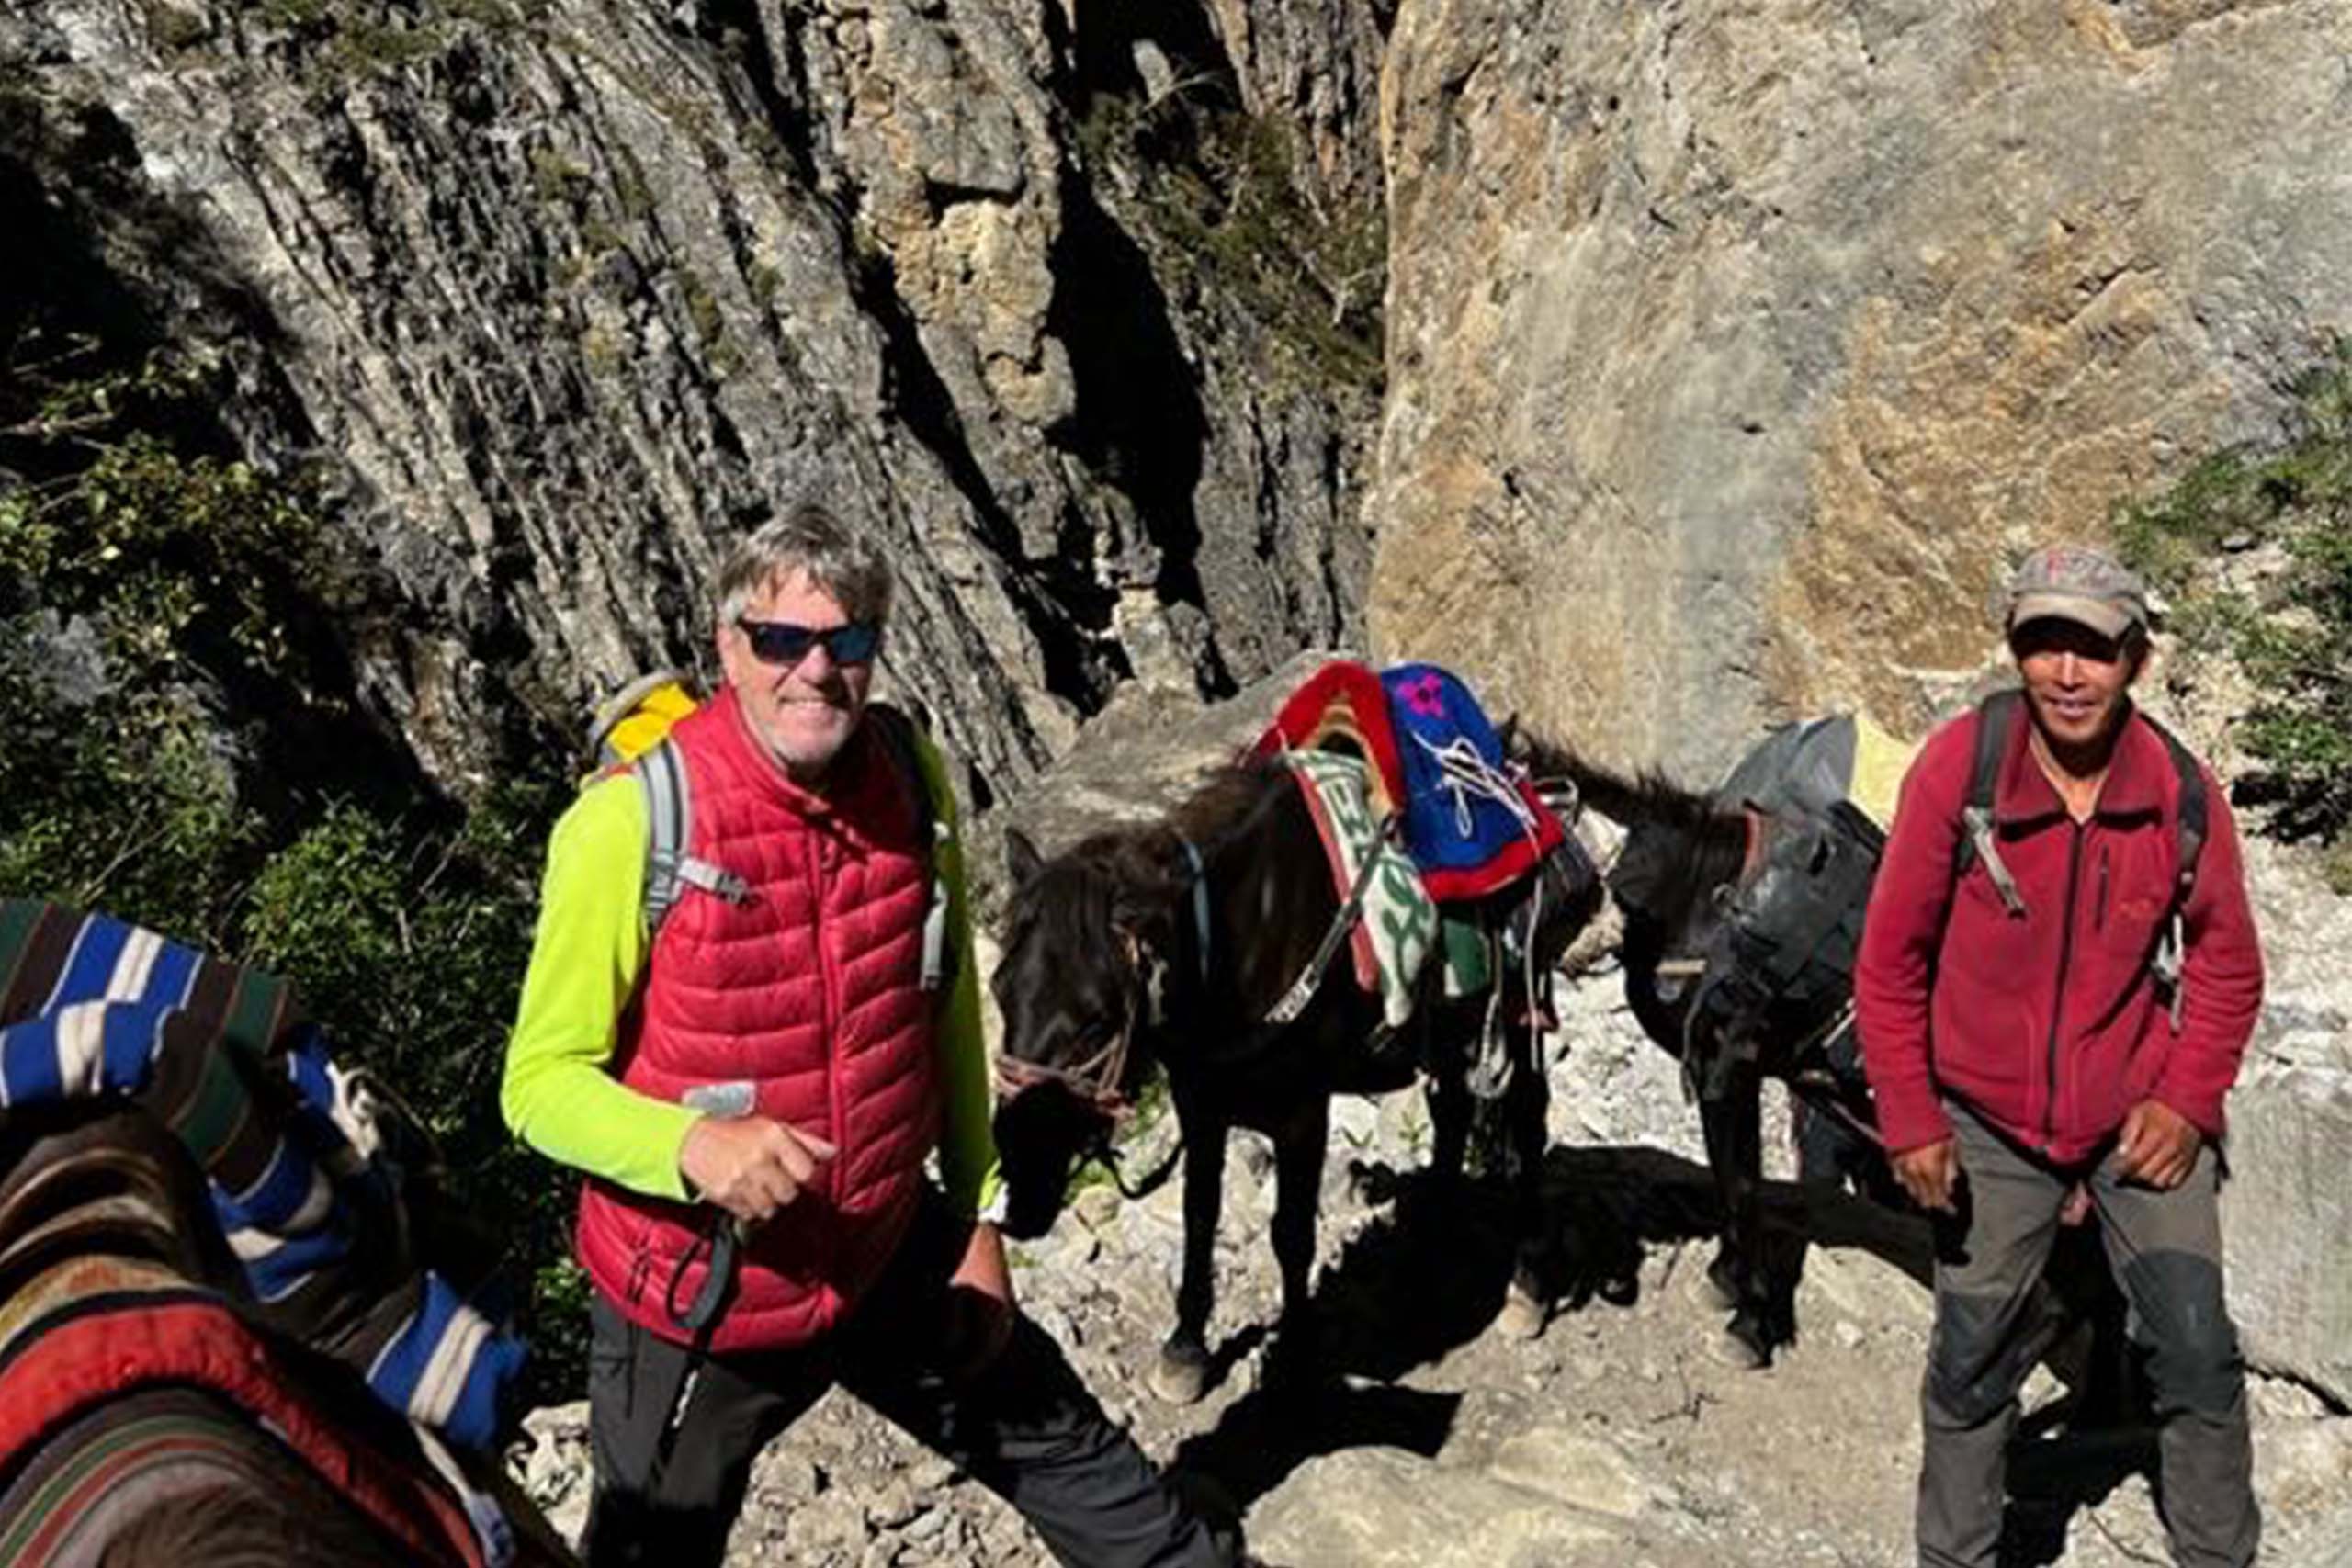 Peter Werth III ’80 (CLAS), with a Nepali guide, during the hike to the yak cheese factory in Bhijer. Werth’s nonprofit organization, Himalaya Currents, works to support community development efforts in Himalayan villages.